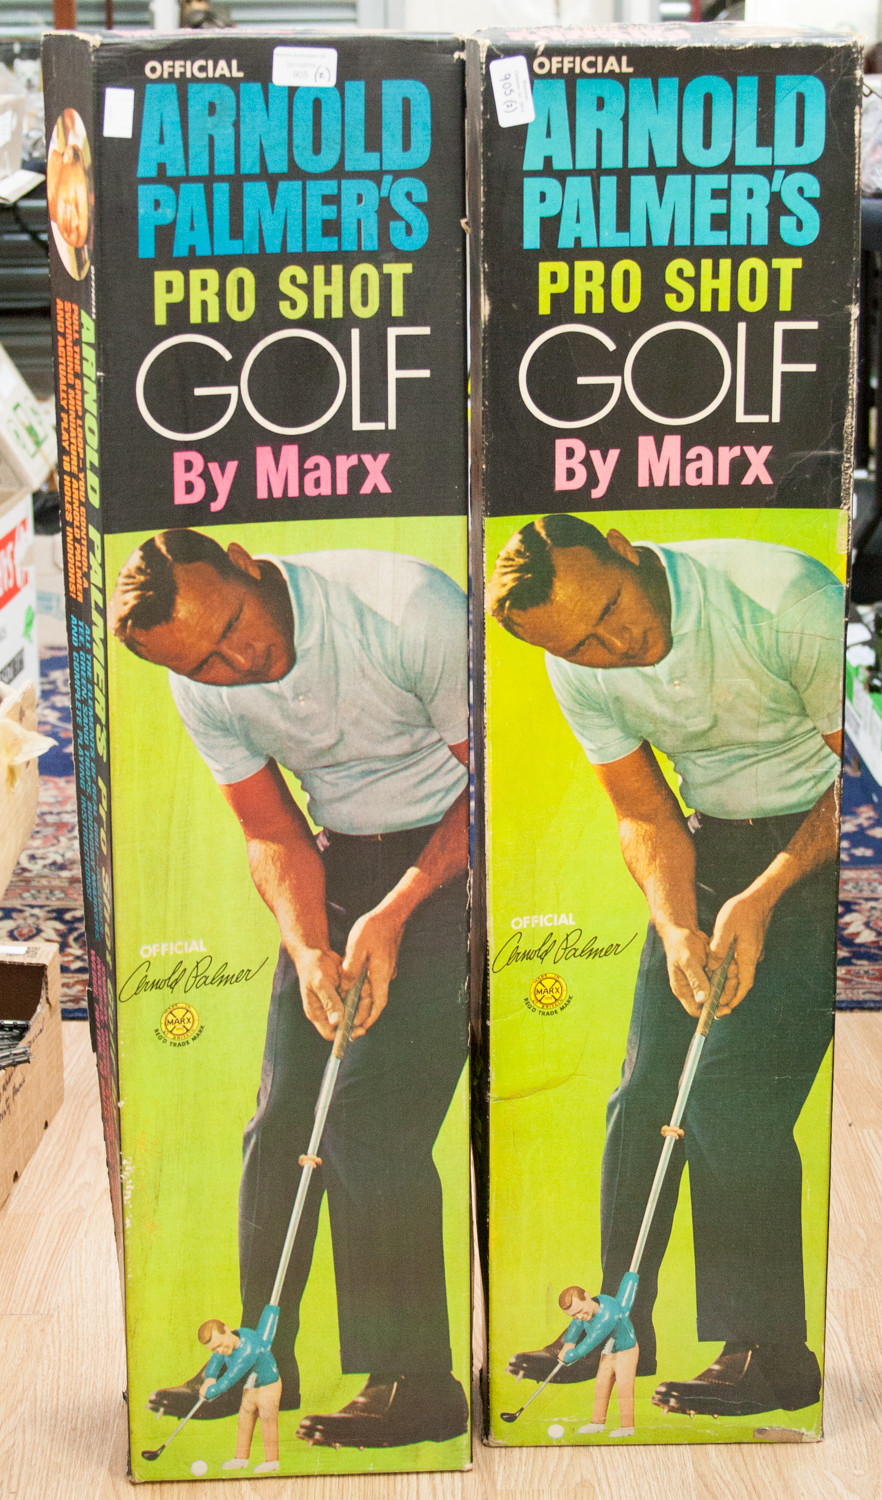 Two Arnold Palmer's pro shot golf by Marx